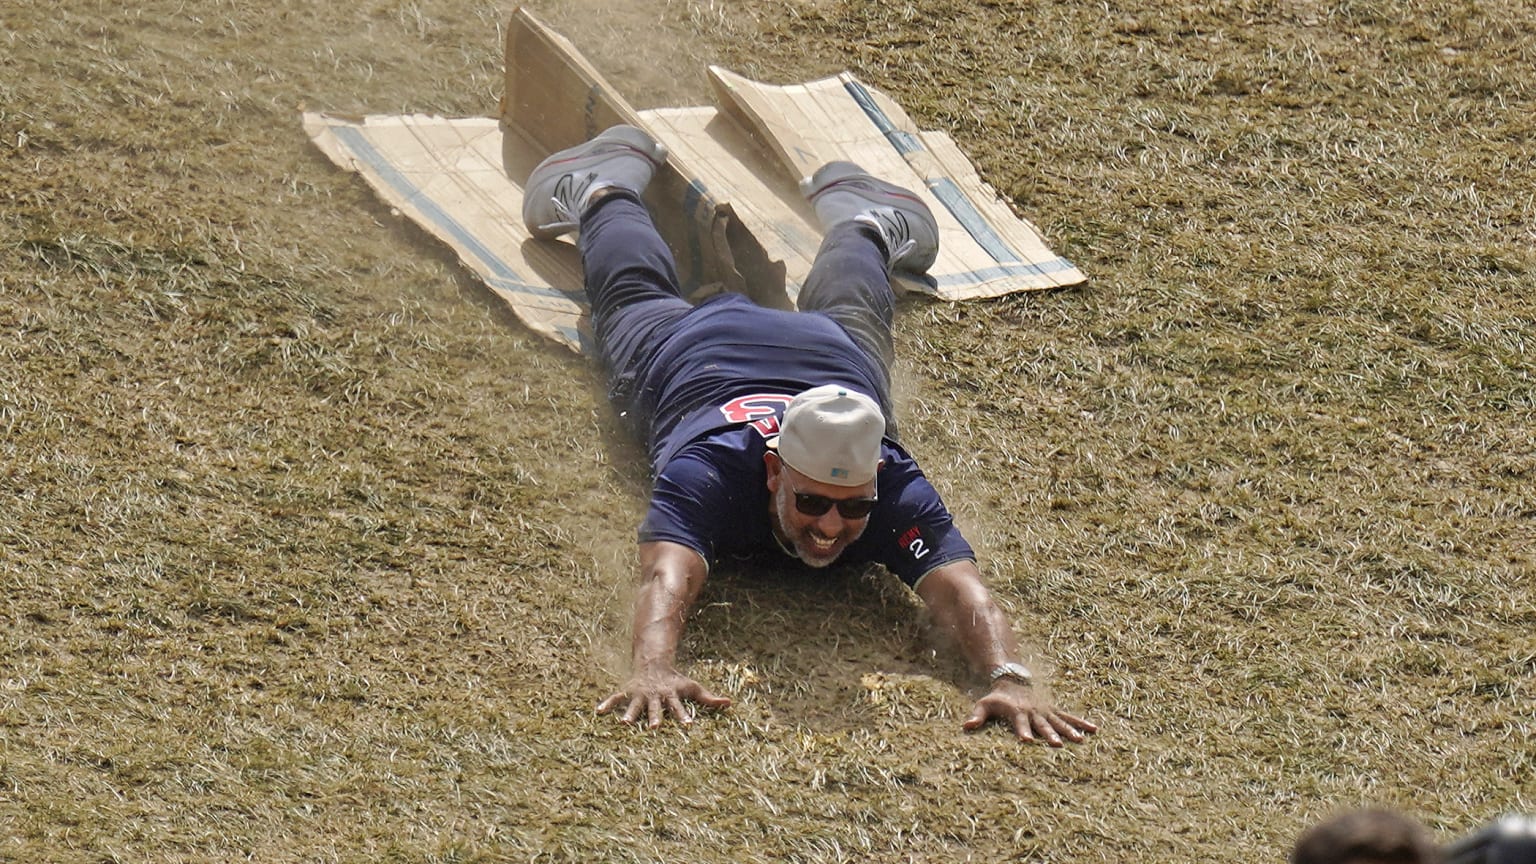 Red Sox manager Alex Cora slides off a piece of cardboard, continuing downhill on the grass